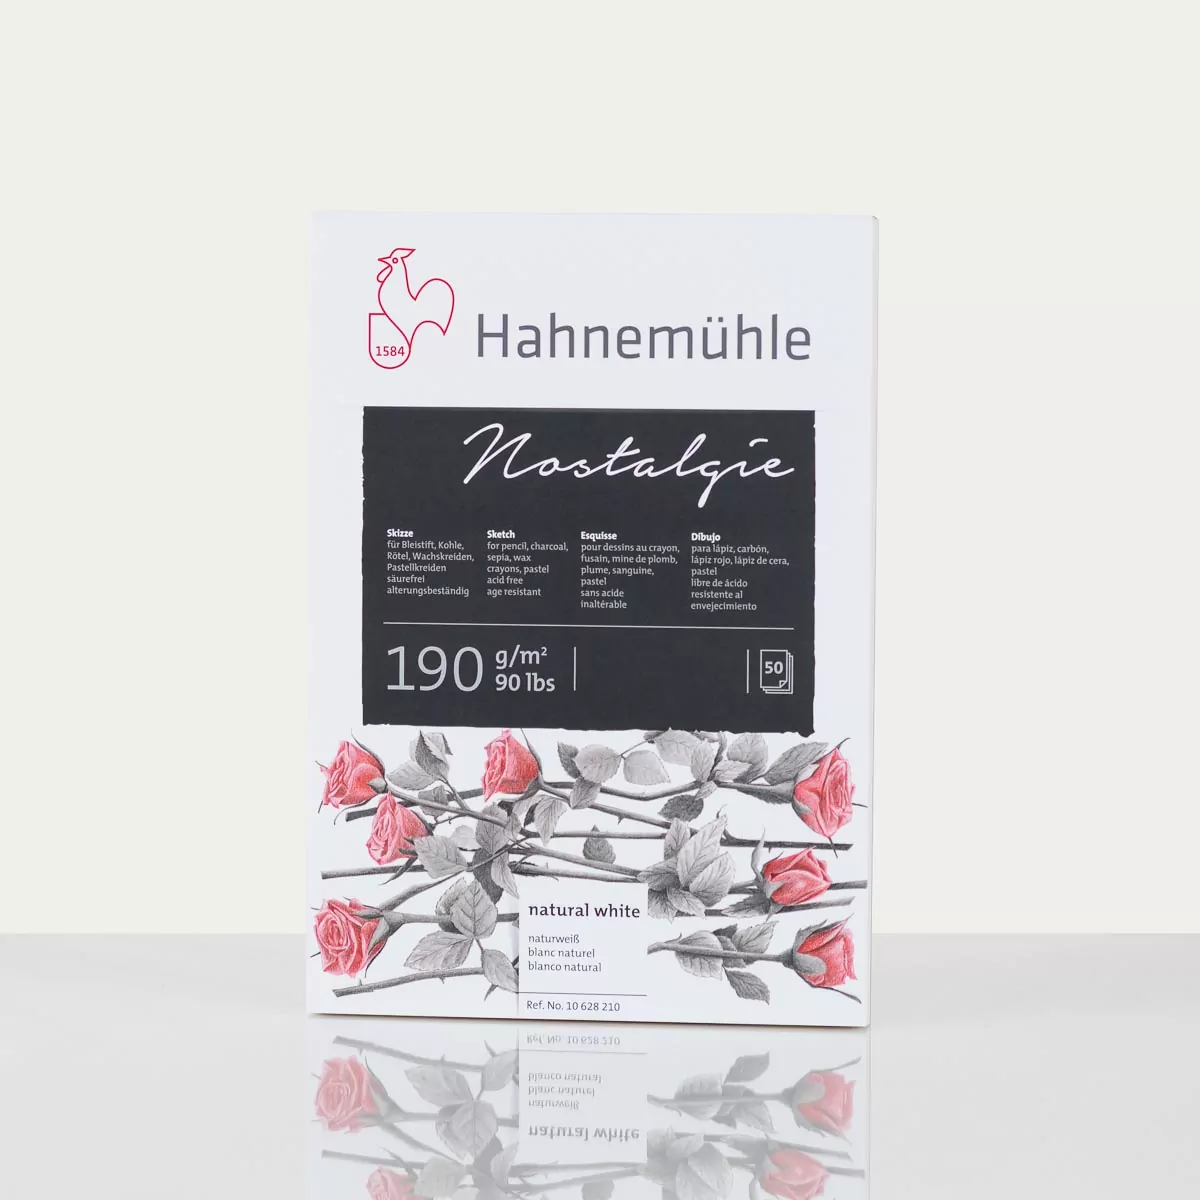 Traditional Hahnemuhle SketchPad “Nostalgie” 190gsm DIN A3  (50 Sheets)